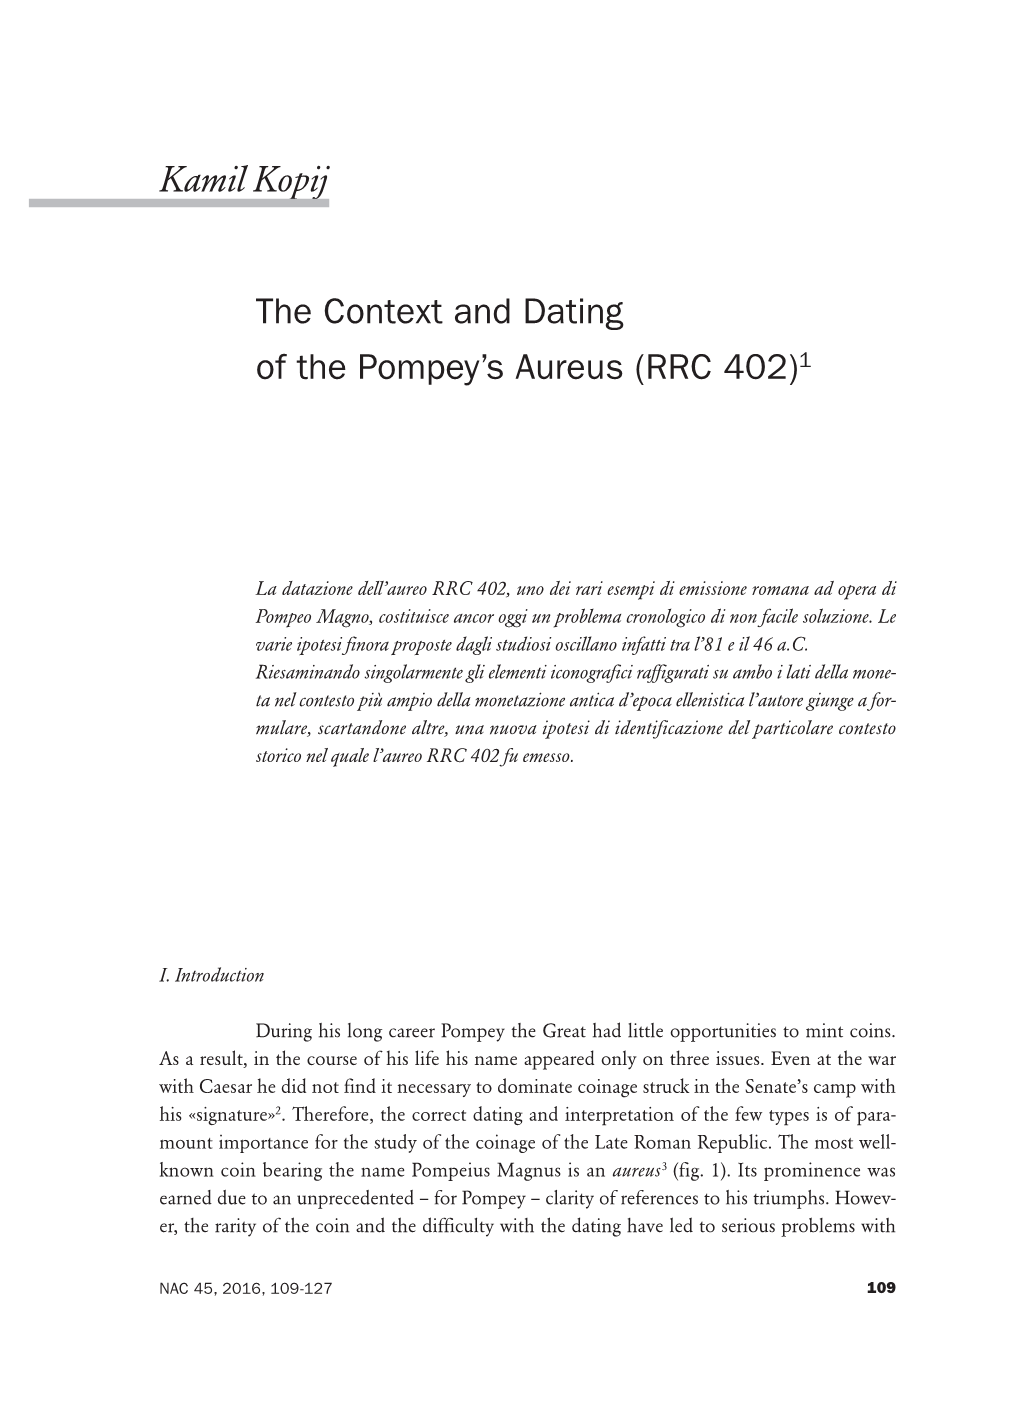 The Context and Dating of the Pompey's Aureus (RRC 402)